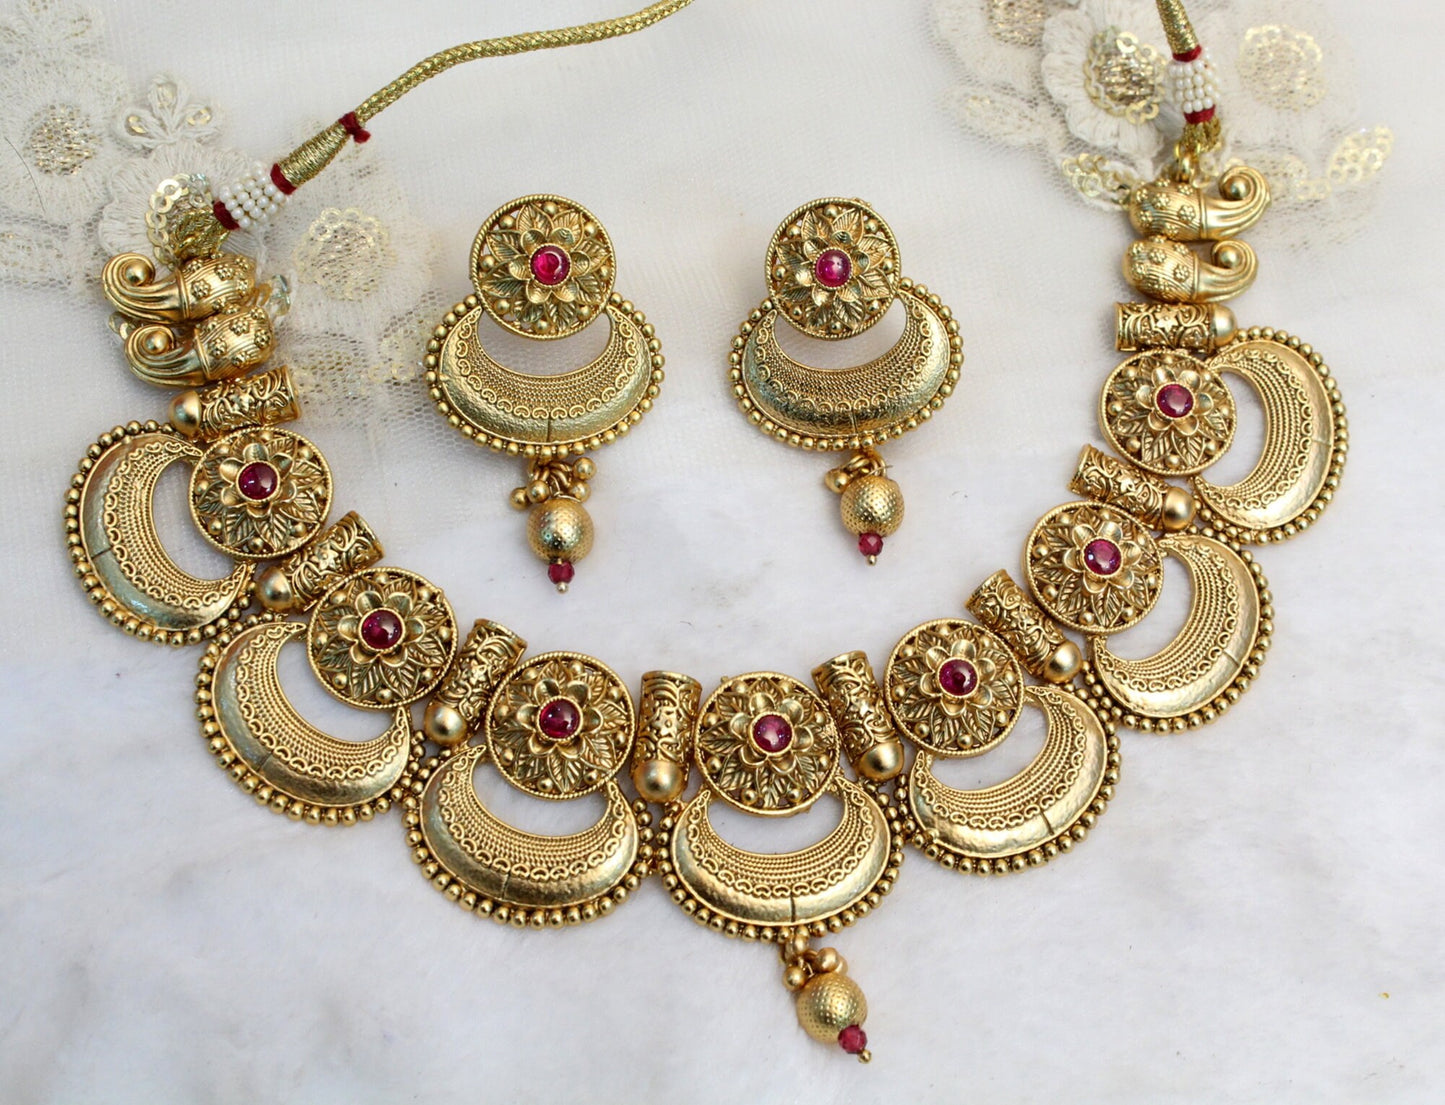 Indian Gold   Jewellery necklace set/Ruby green mat finish necklace Set Bollywood Style Gold Finish South Indian bridal Jewellery